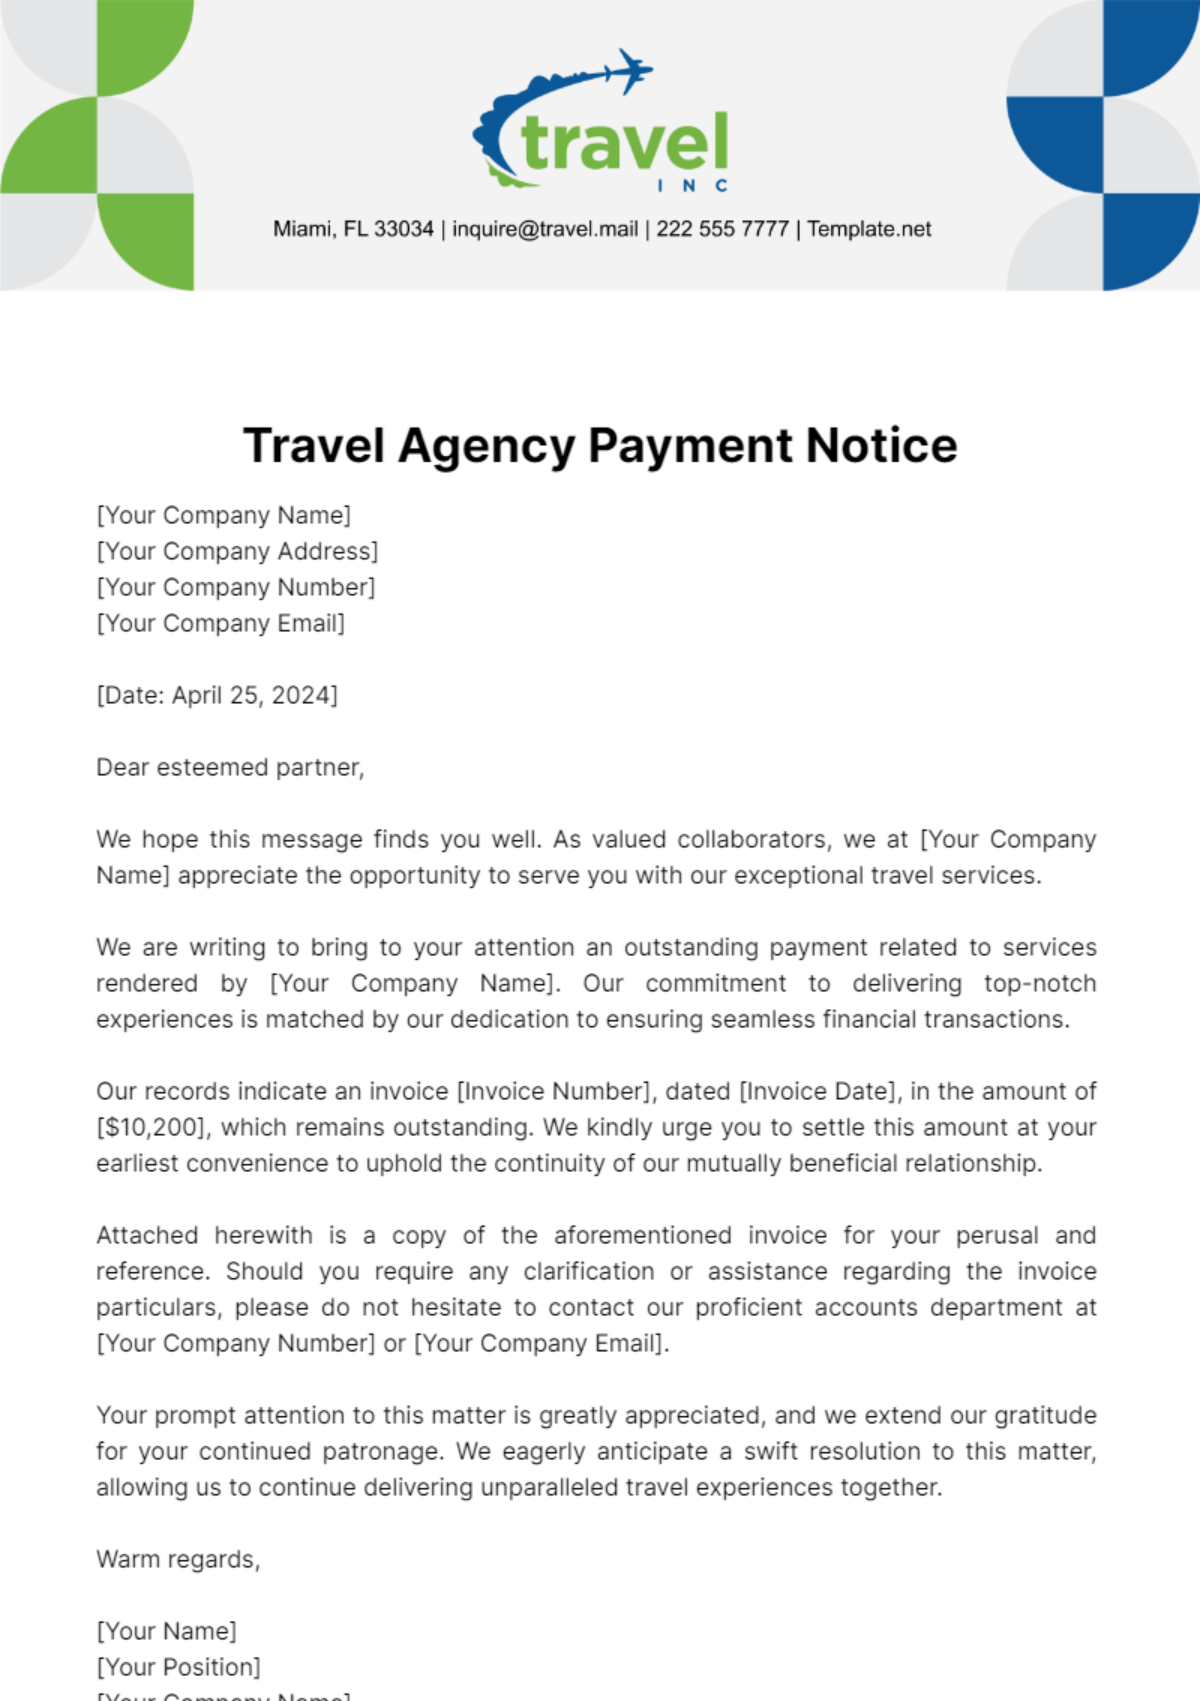 Travel Agency Payment Notice Template